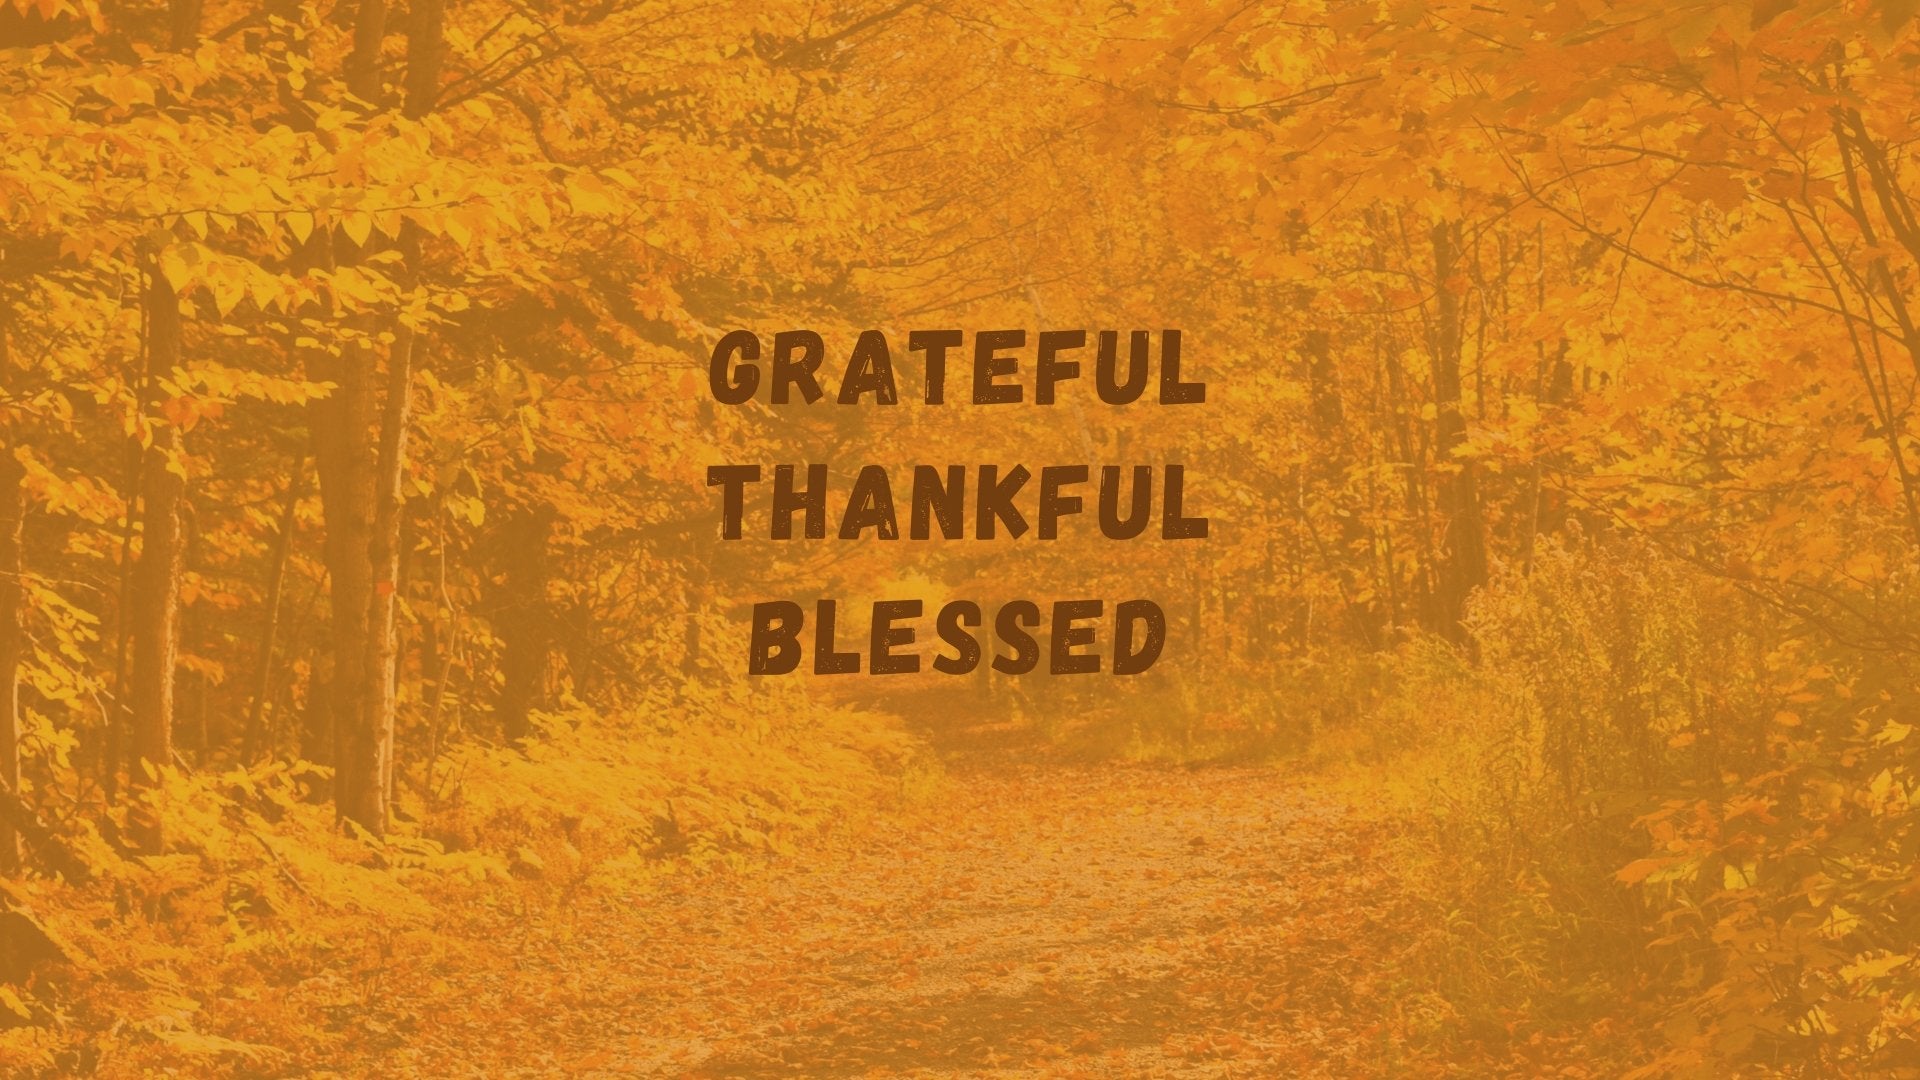 Grateful Thankful Blessed White Transparent Motivation Lettering Thankful  Grateful Blessed Motivation Success Hope PNG Image For Free Download